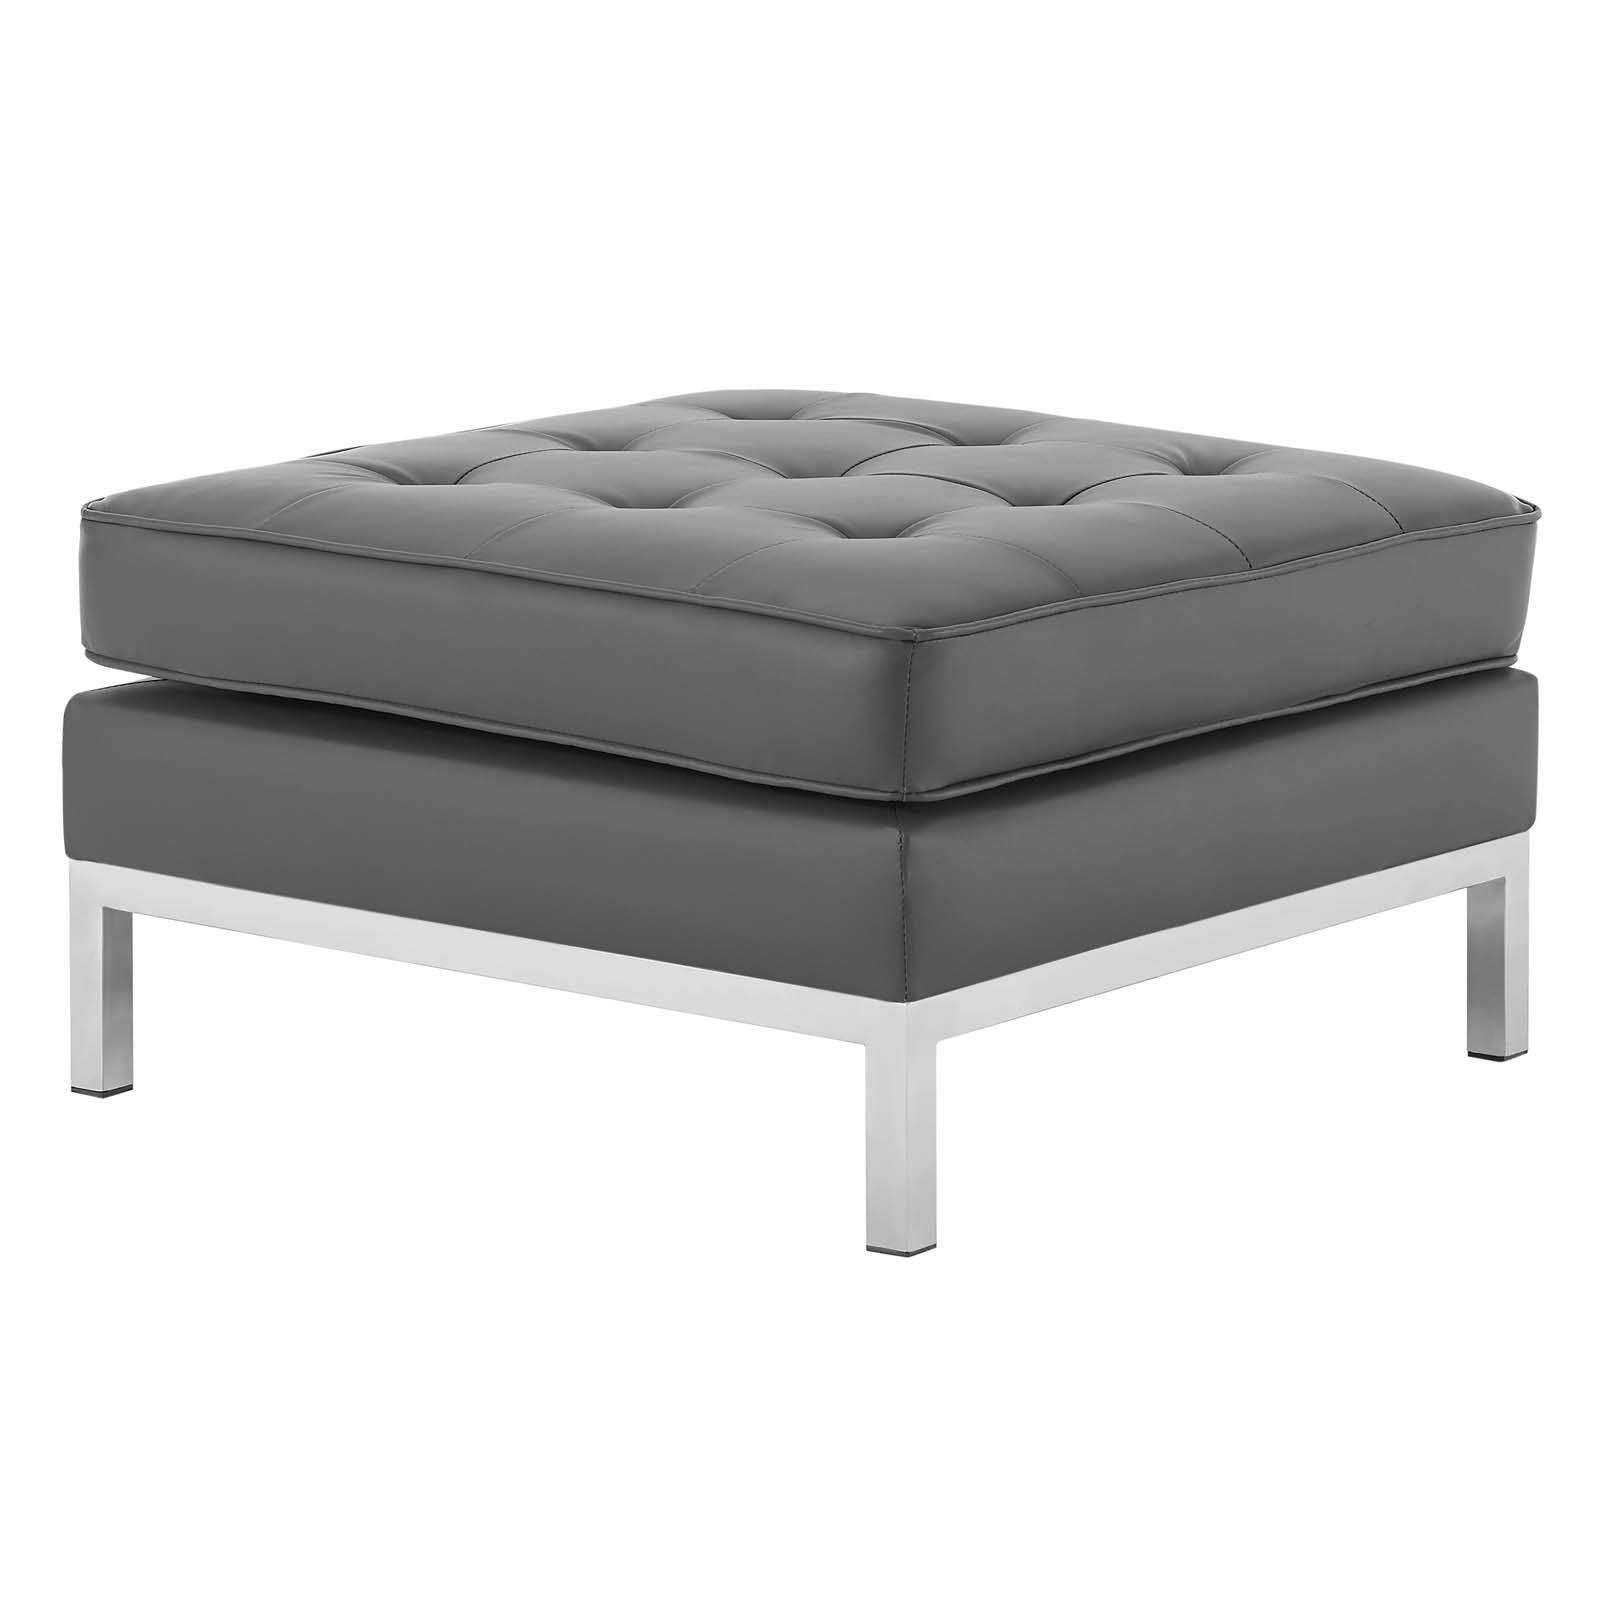 Silver Faux Leather Ottomans With Pull Tab Intended For Most Popular Modterior :: Living Room :: Ottomans :: Loft Tufted Upholstered Faux (View 4 of 10)